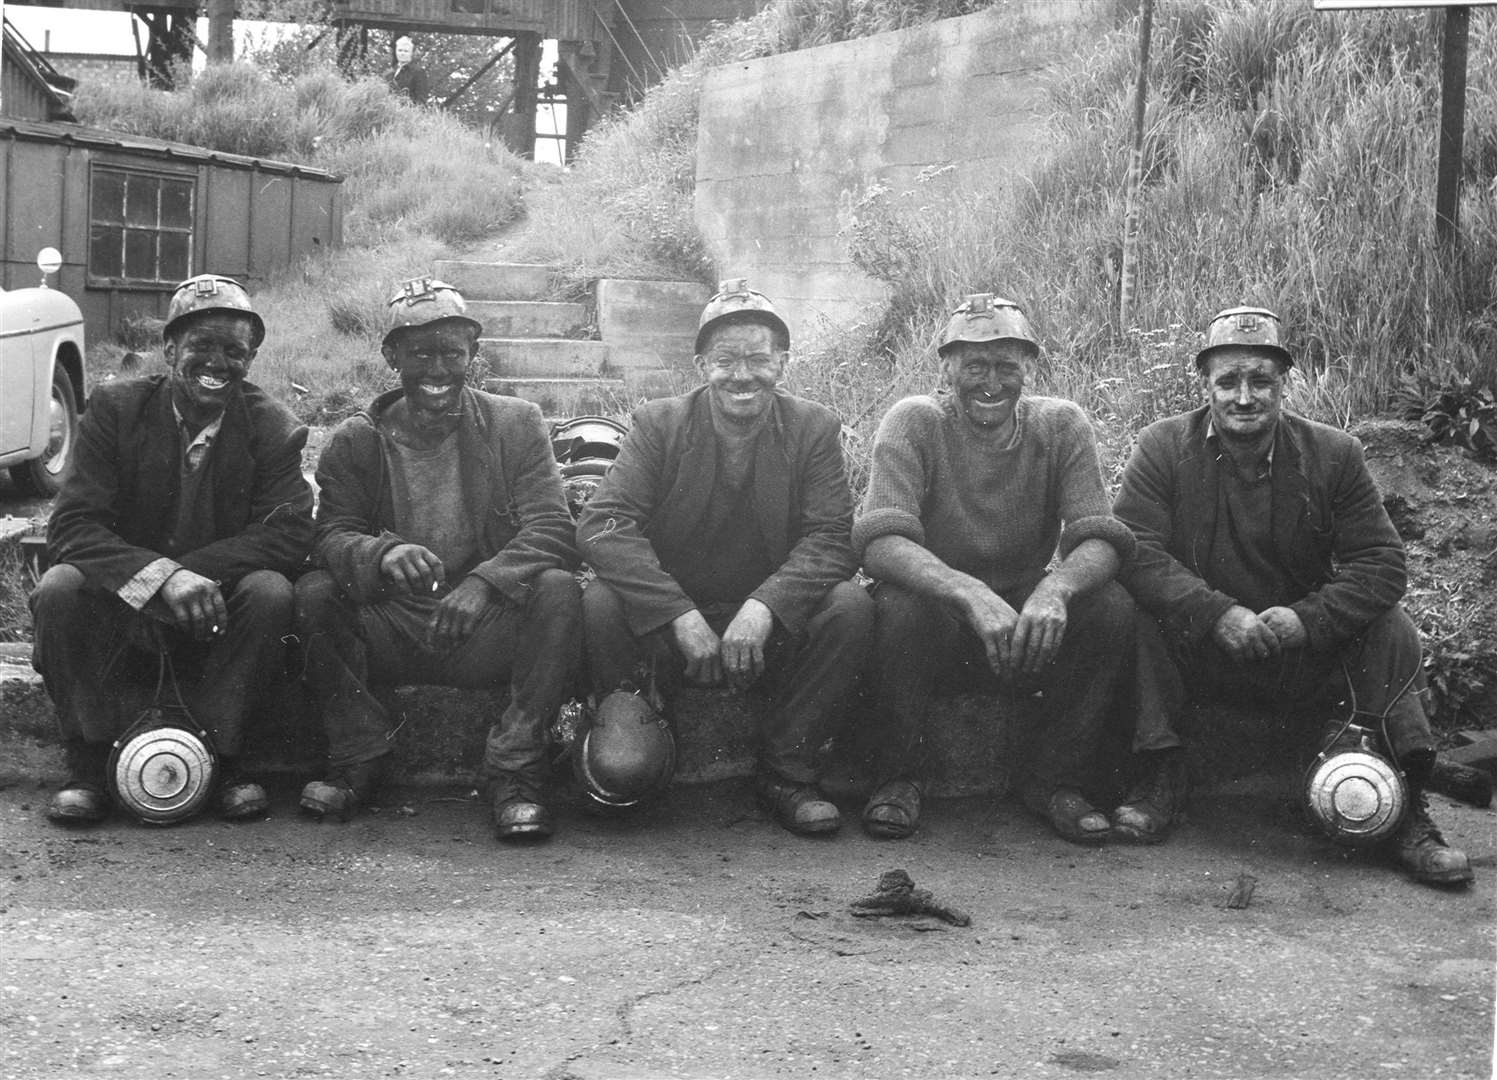 Fresh out of the pit, these bygone miners line up for a photo